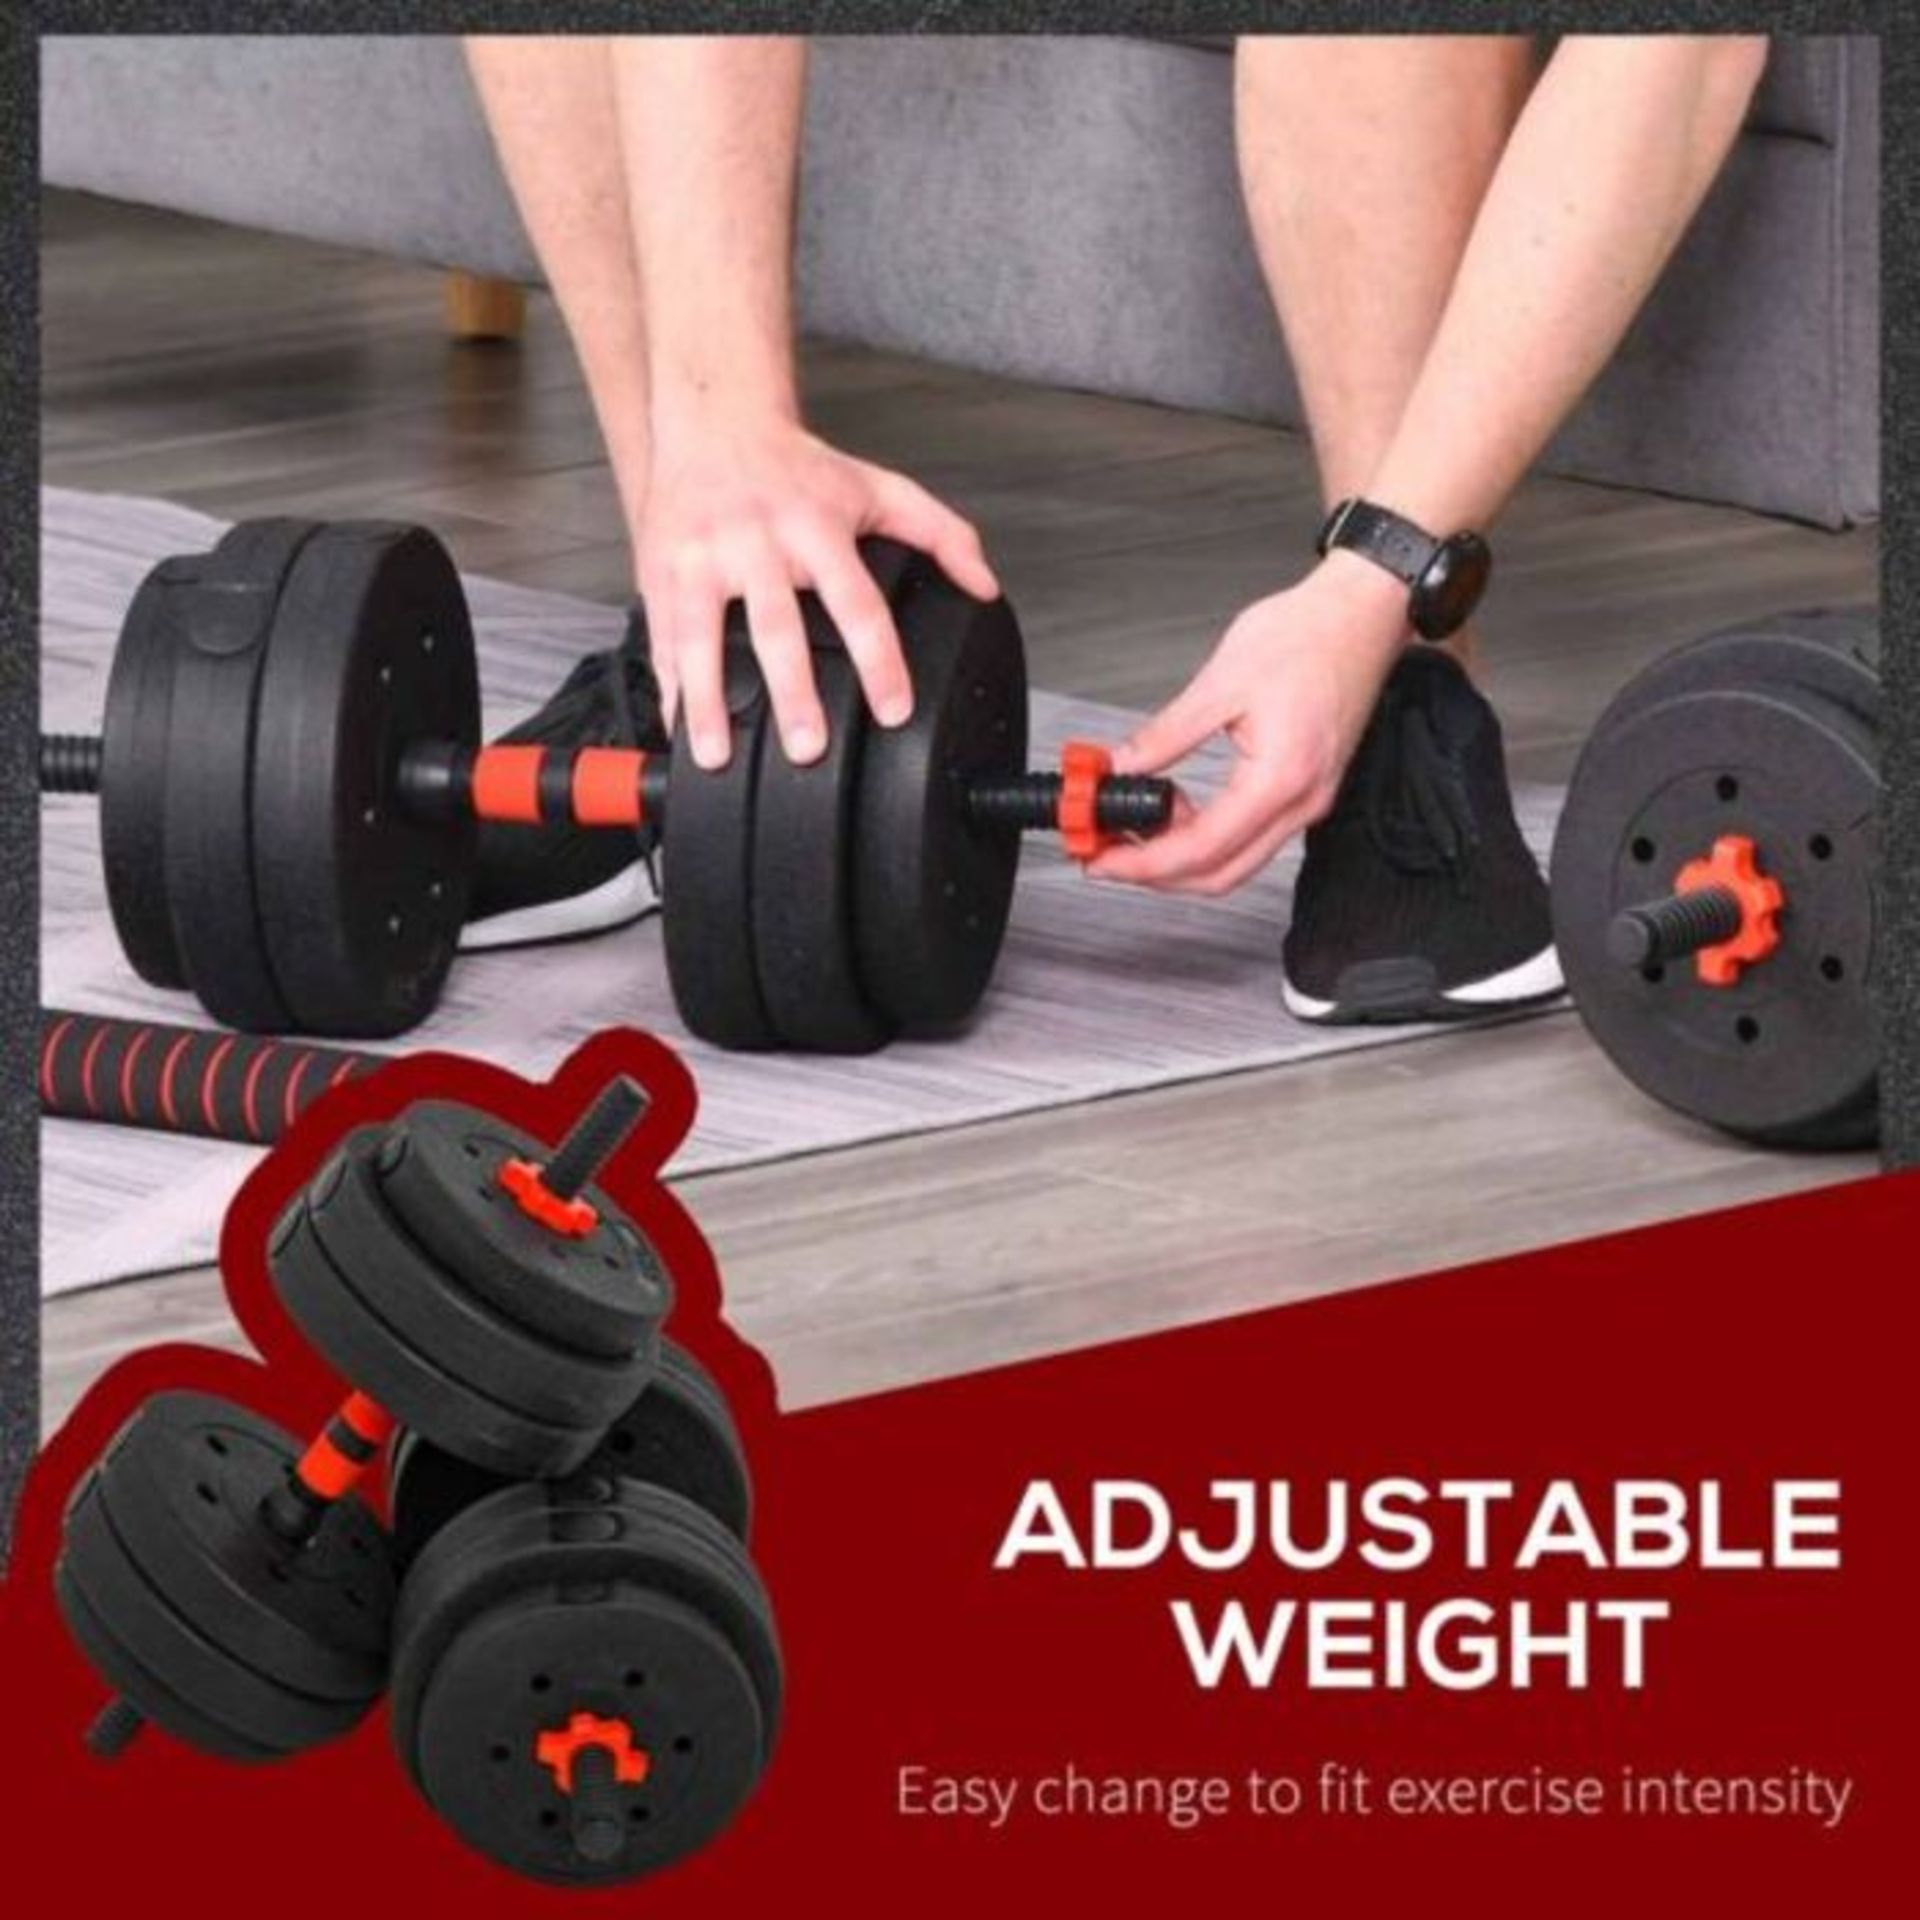 10x Hom Com 2 in1 Barbell/Dumb bell 30kg weight set, new and boxed, Similar sets retail at around ? - Image 2 of 4